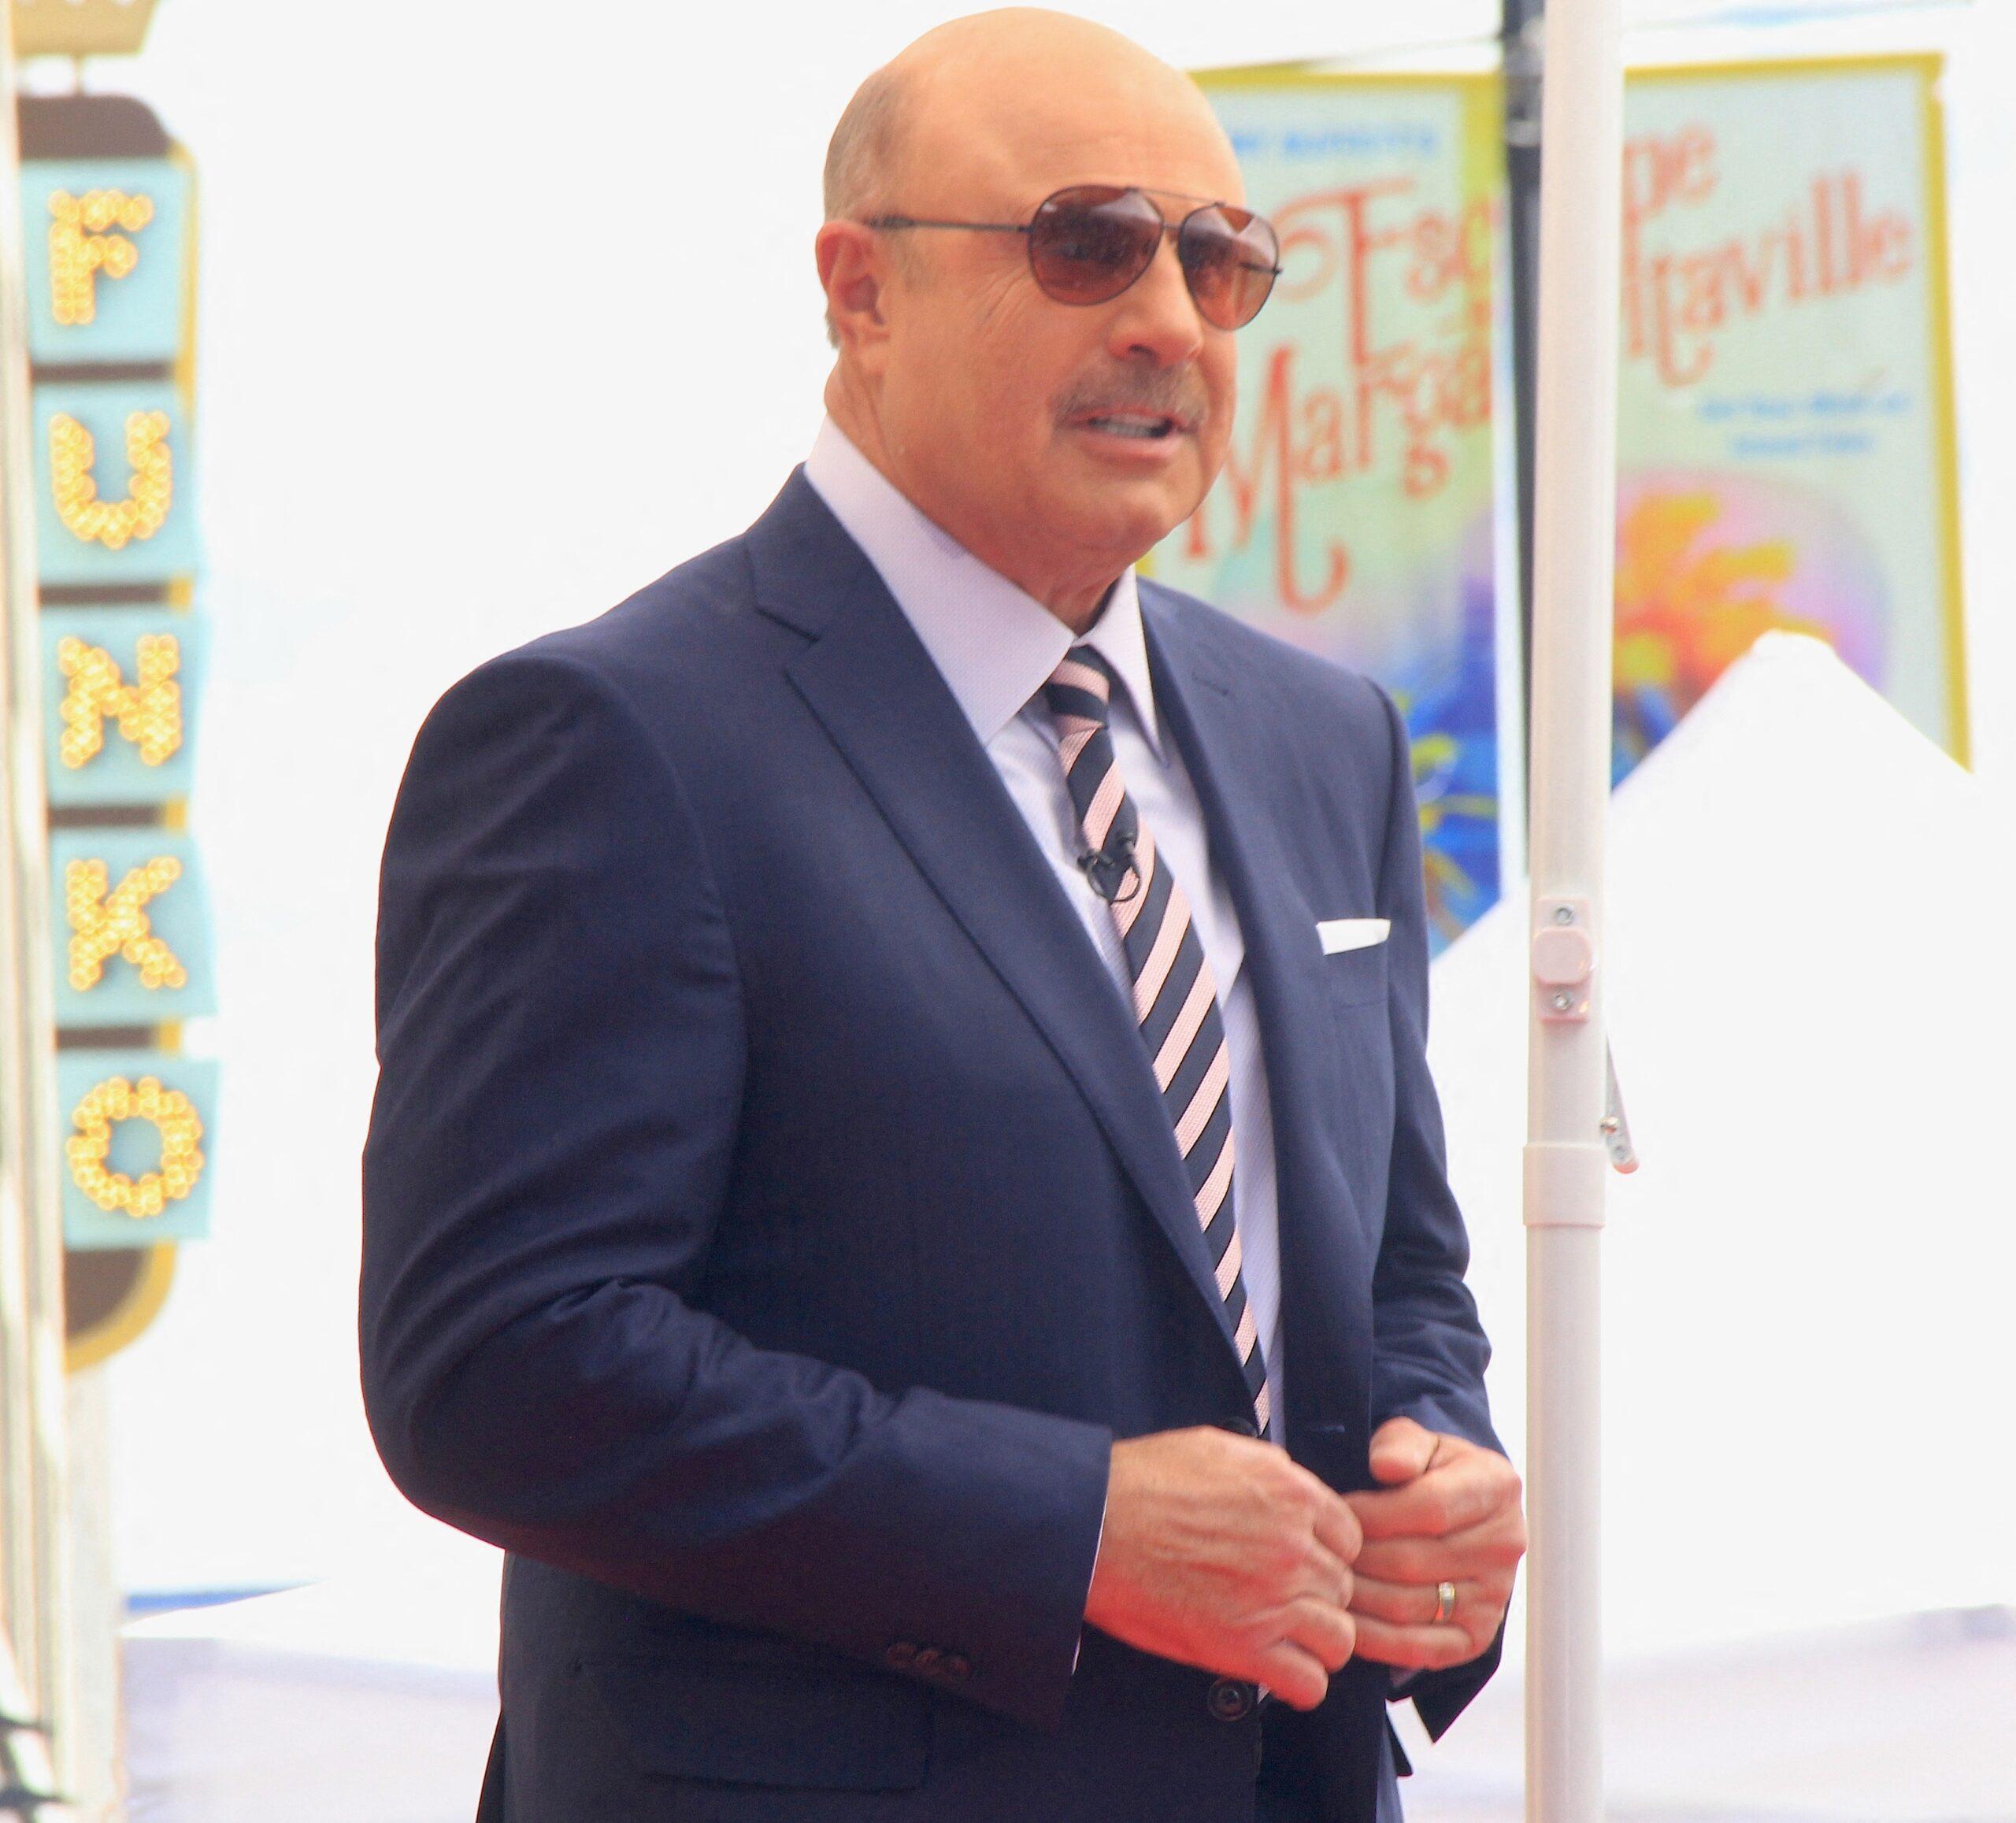 Dr. Phil Sued For Losing Guest's Only Copy Of Unpublished Domestic Violence Book